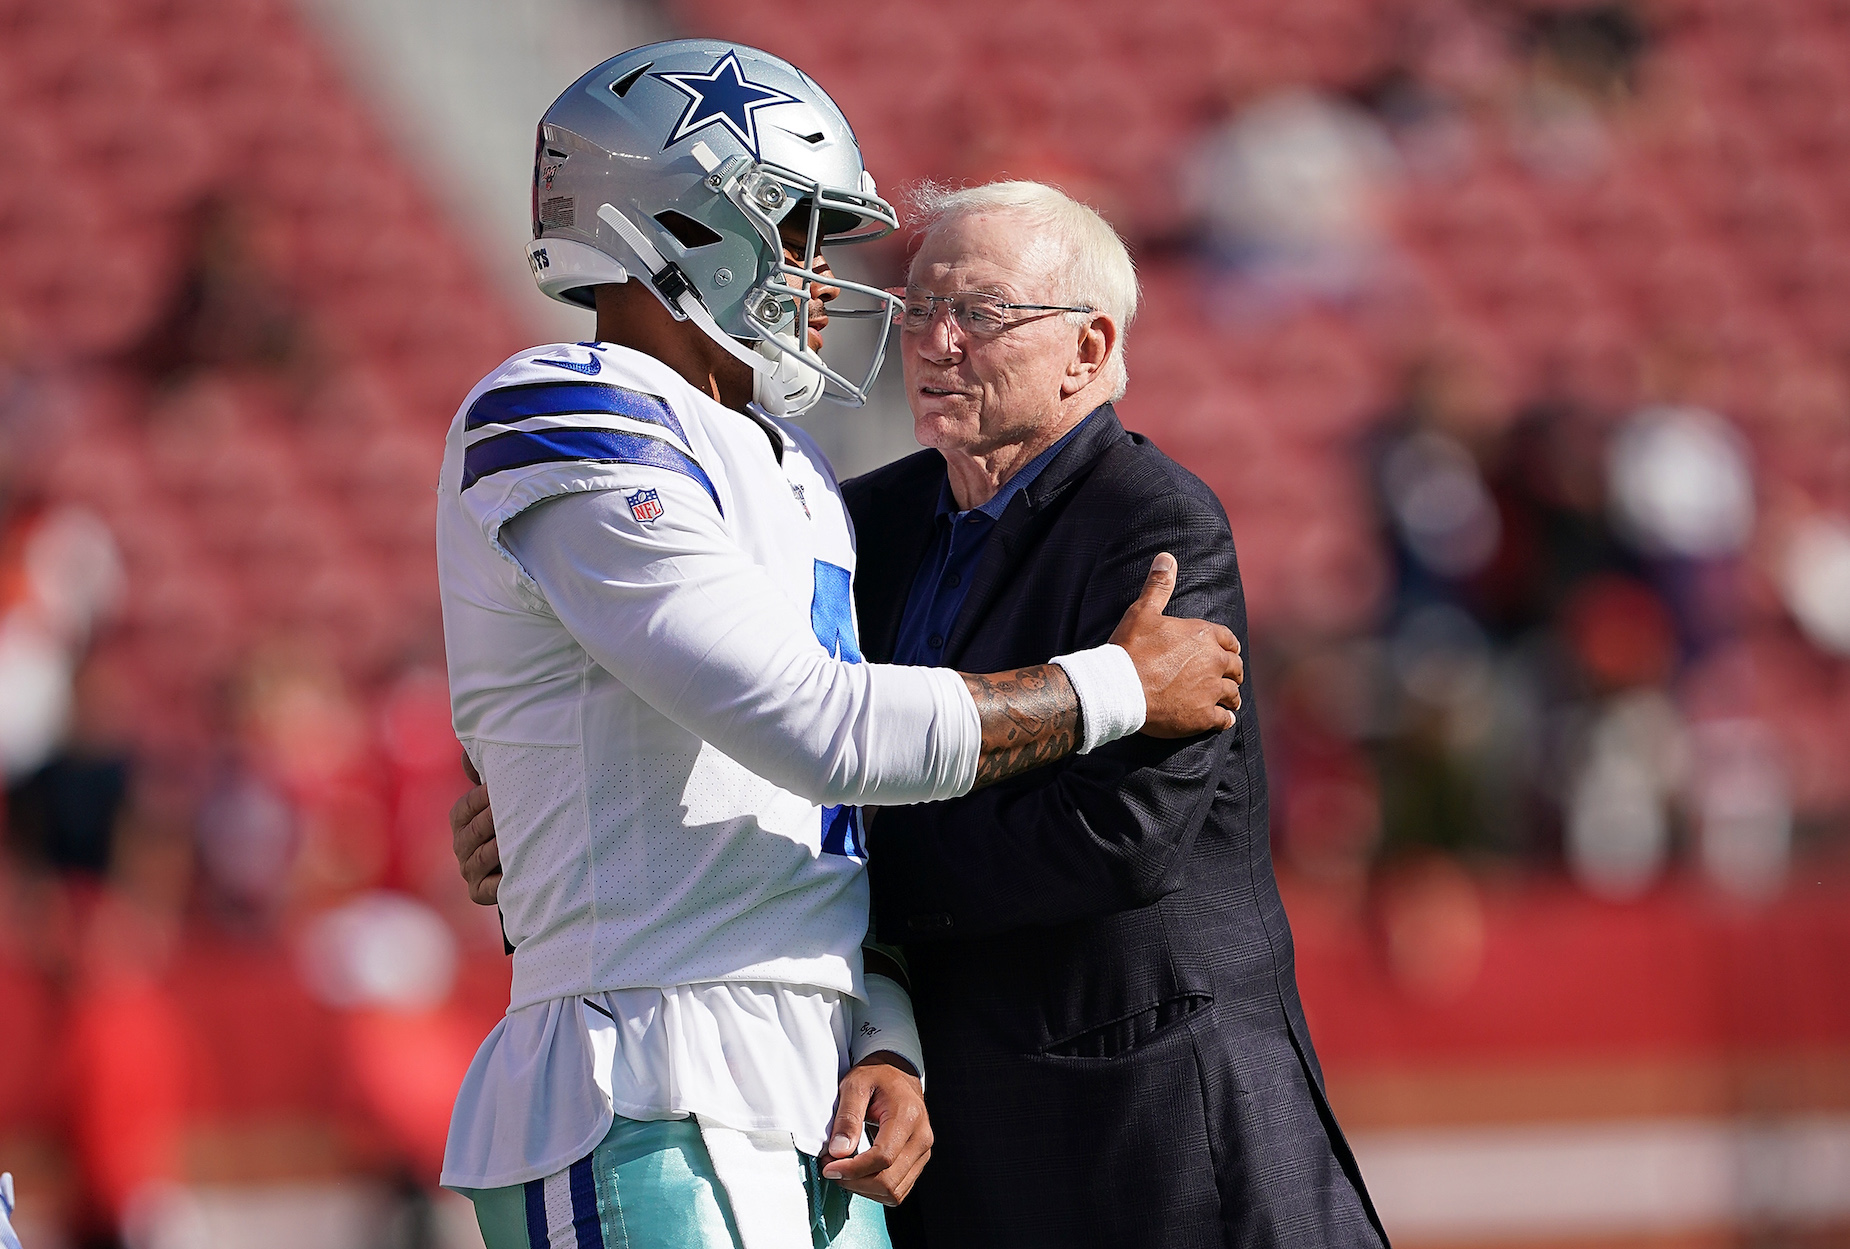 Jerry Jones has made it pretty clear what he thinks about national anthem protests; Dak Prescott, however, seems to have something different in mind.